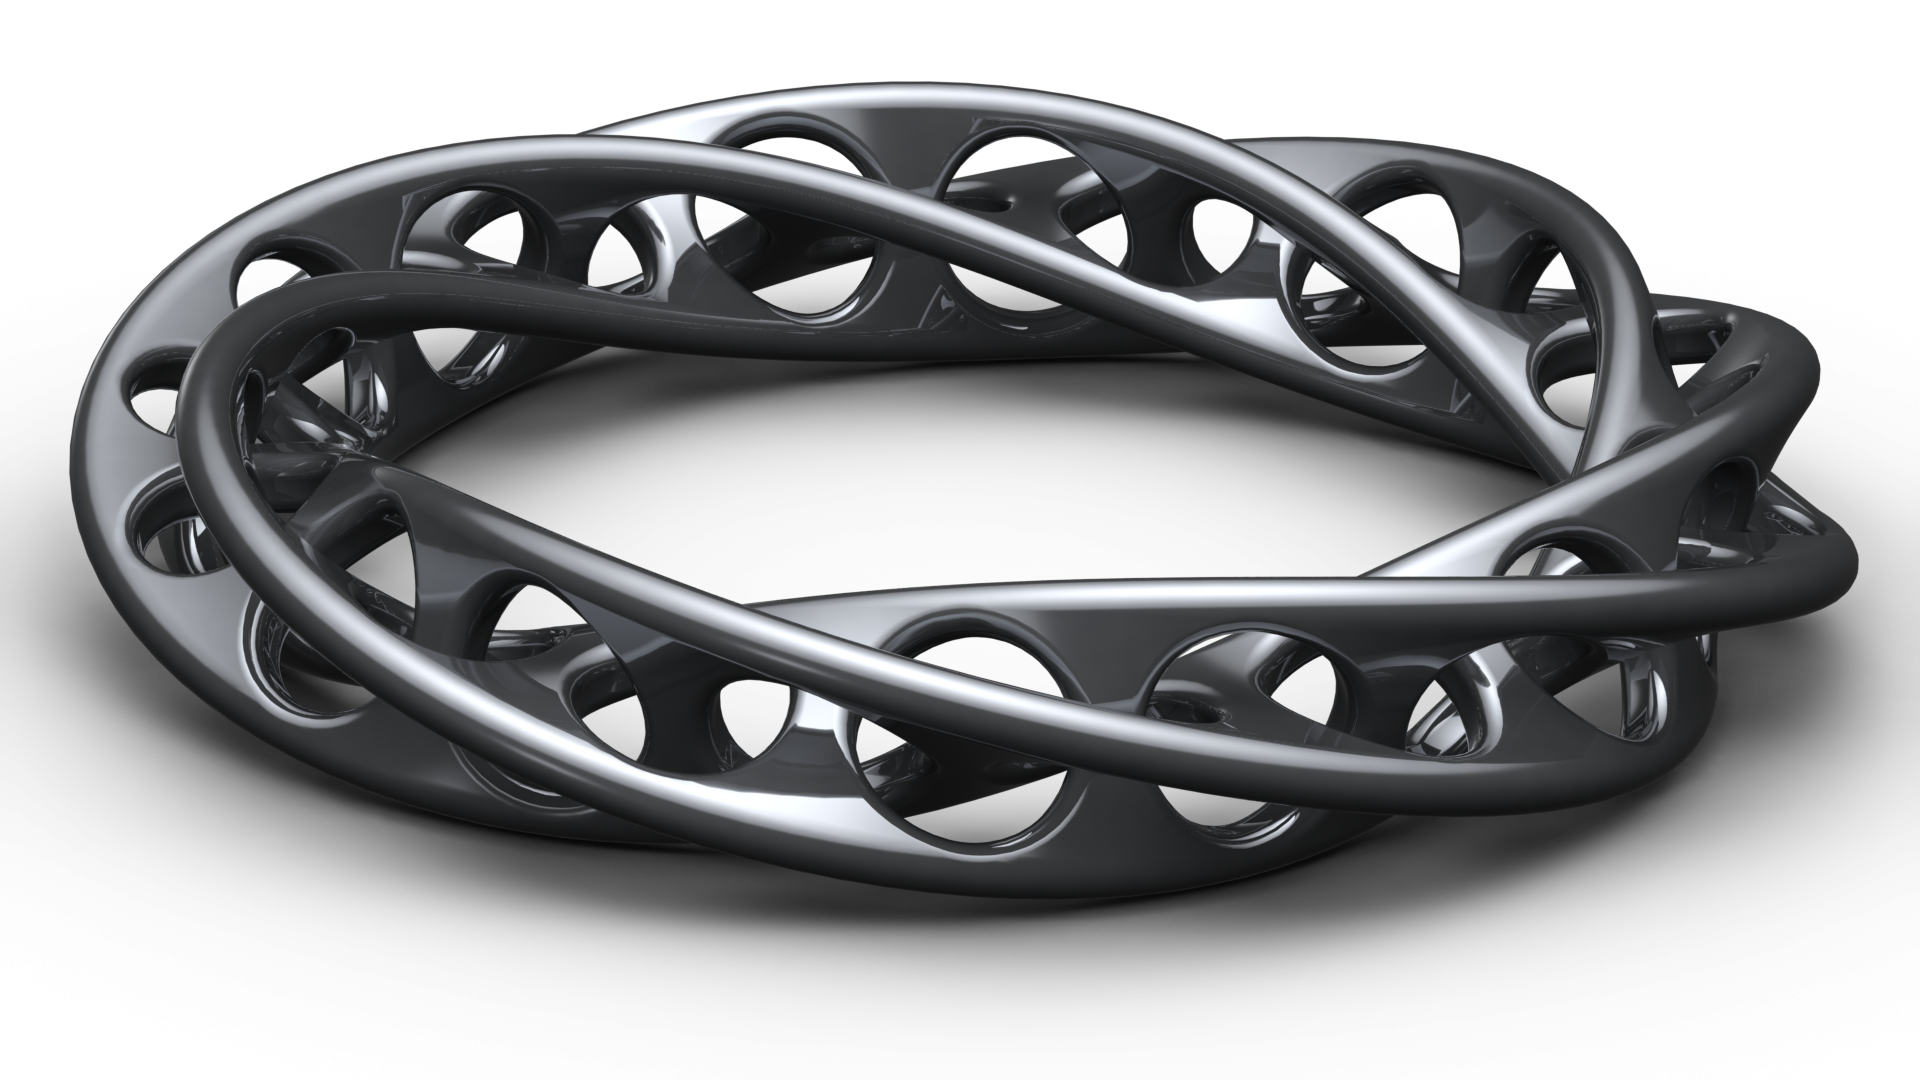 General 1920x1080 digital art simple background Mobius strip circle reflection abstract CGI monochrome